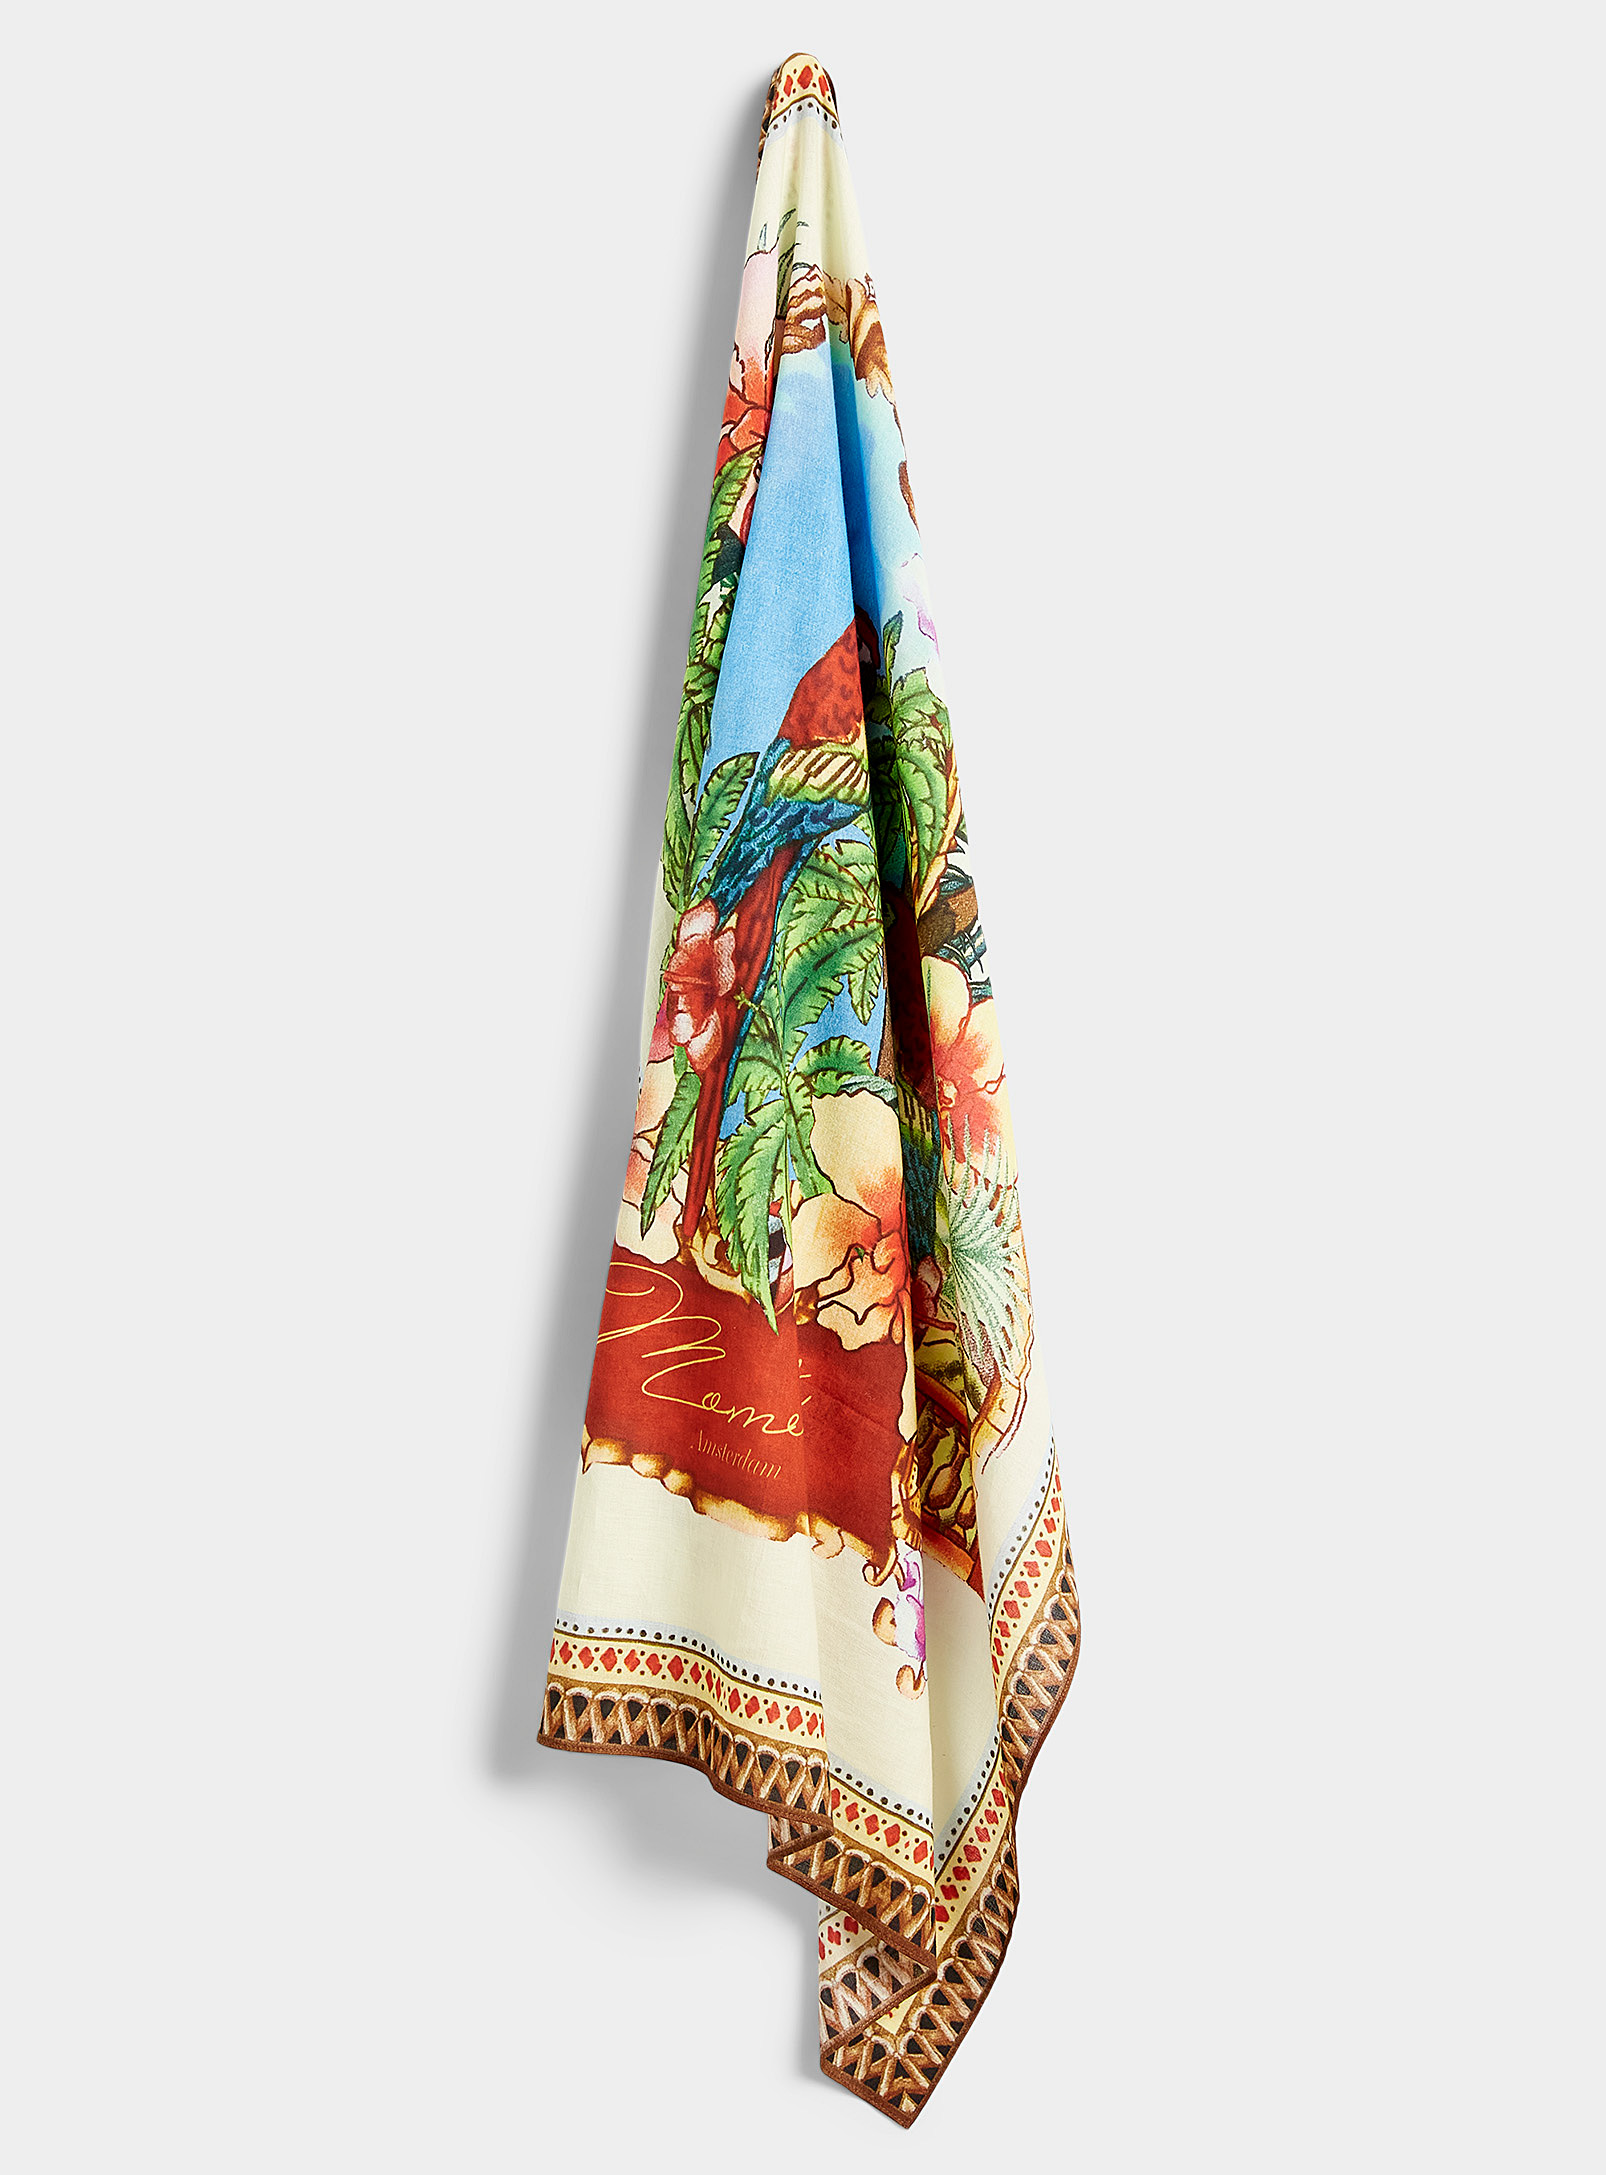 Moment by moment - Le foulard paradis tropical